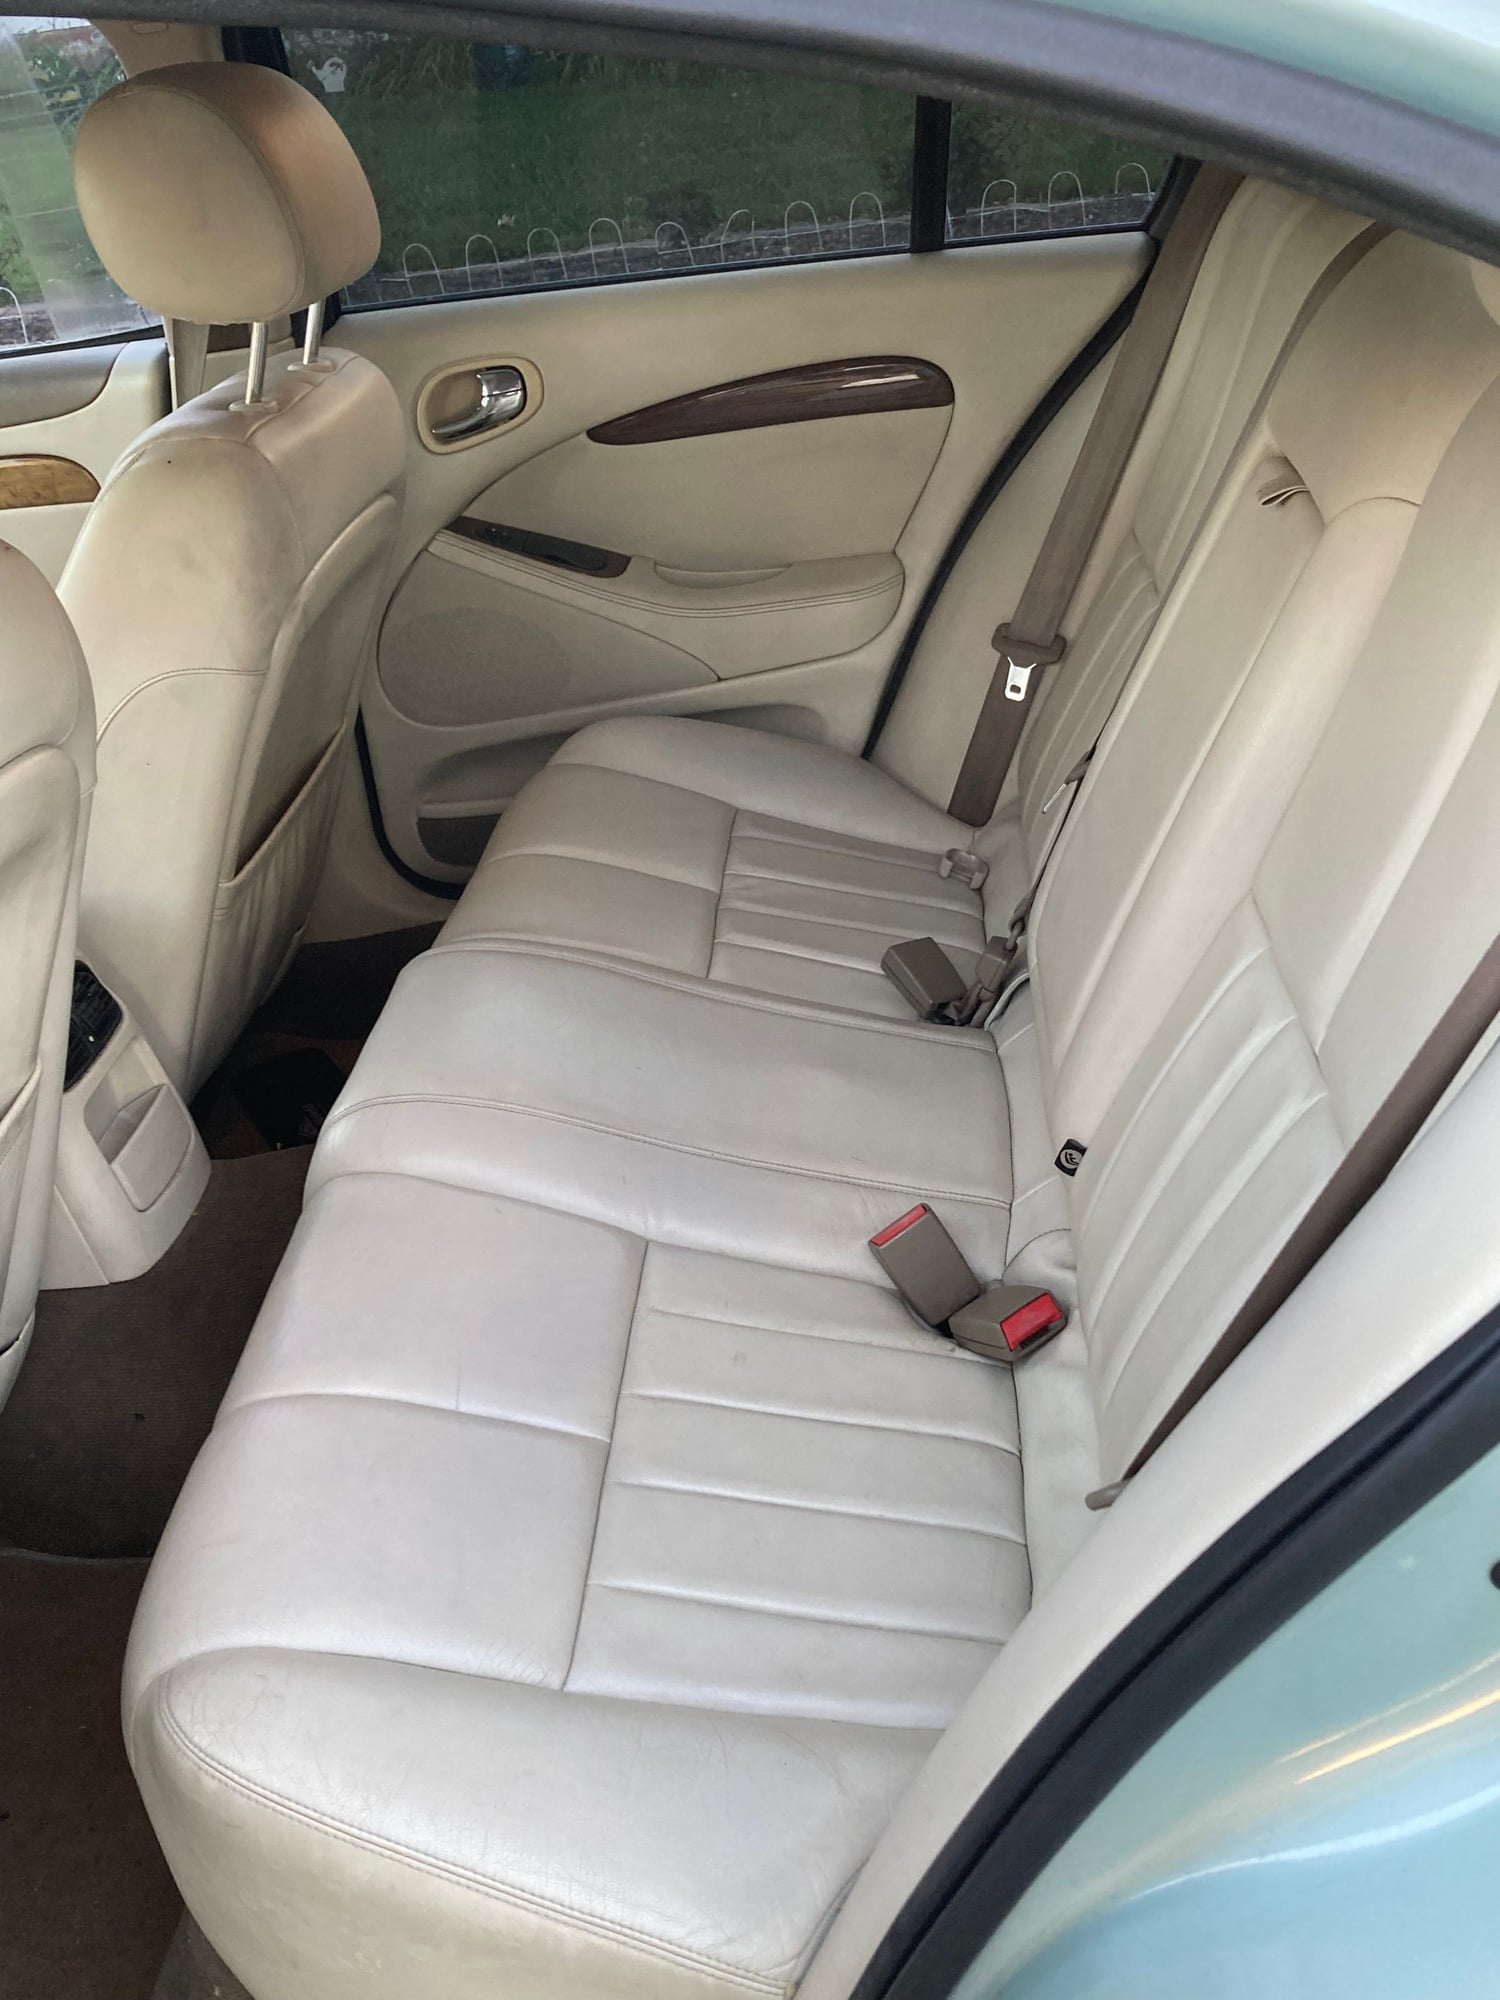 2003 Jaguar S-Type - 2003 Jaguar S Type is looking for a new home! - Used - VIN SAJEA01T43FM76539 - 200,203 Miles - 6 cyl - 2WD - Automatic - Sedan - Blue - Anaheim, CA 92805, United States